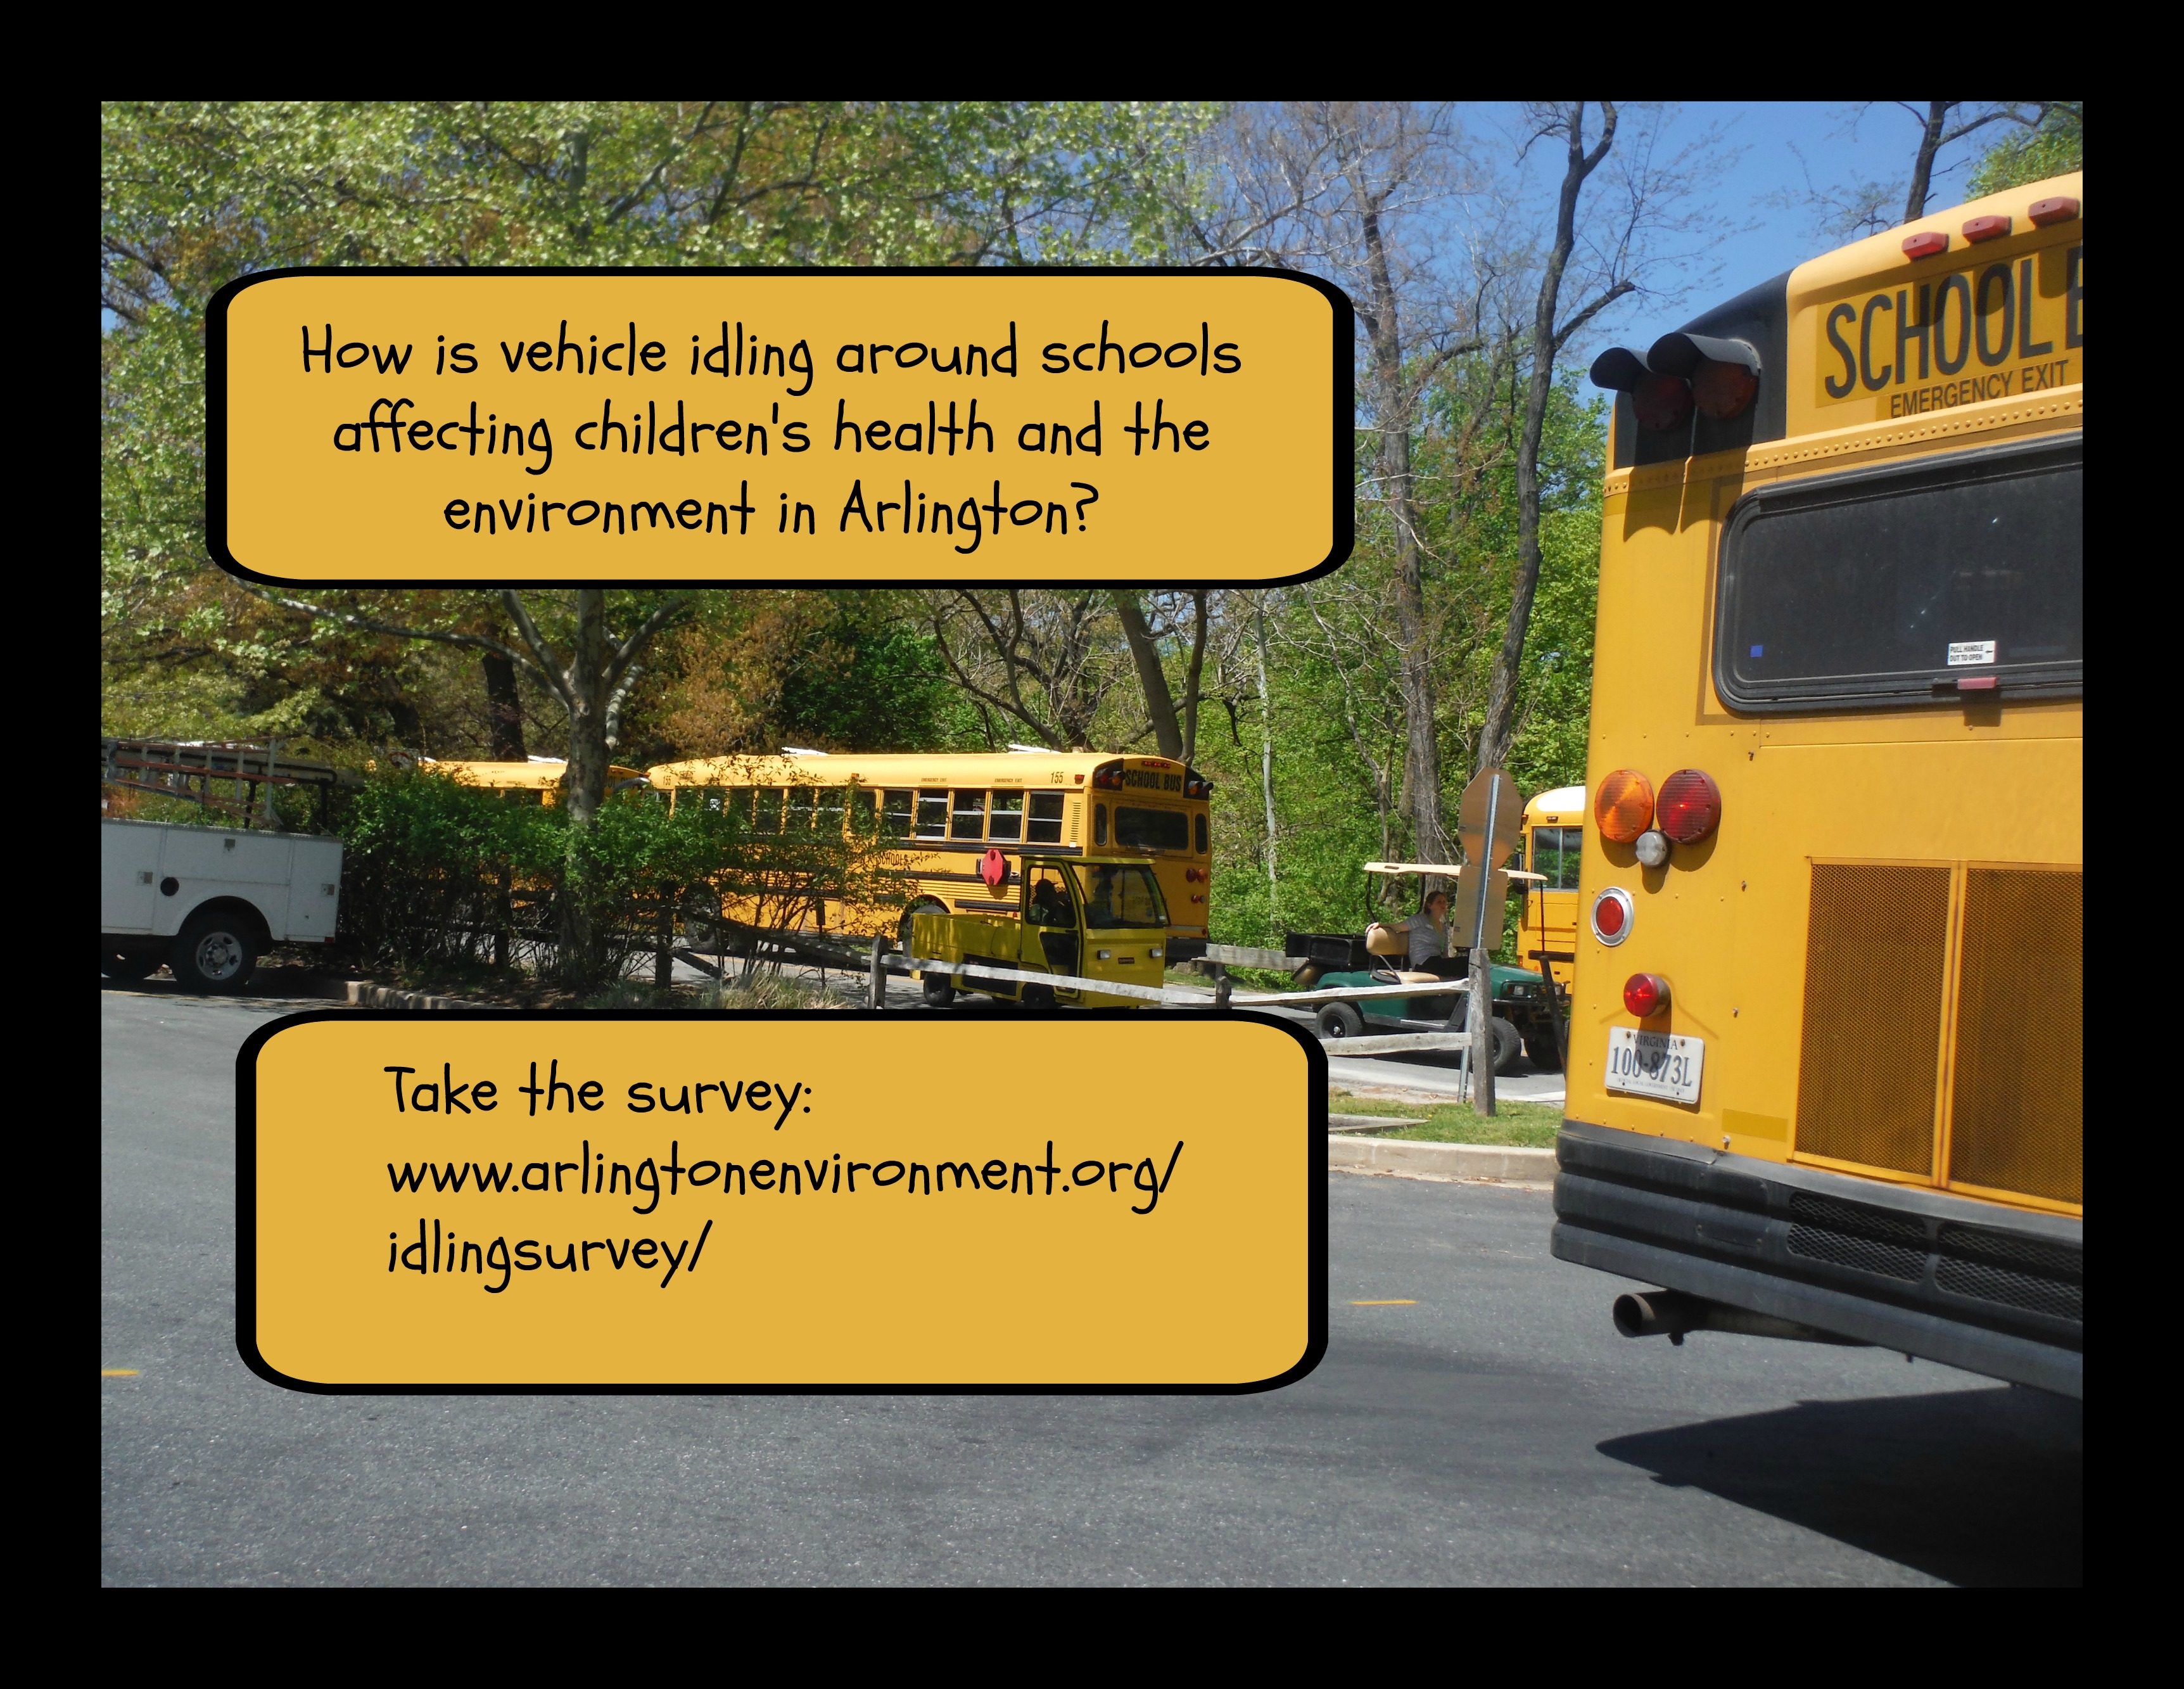 Arlingtonians for a Clean Environment Seeks Input on Vehicle Idling at Schools